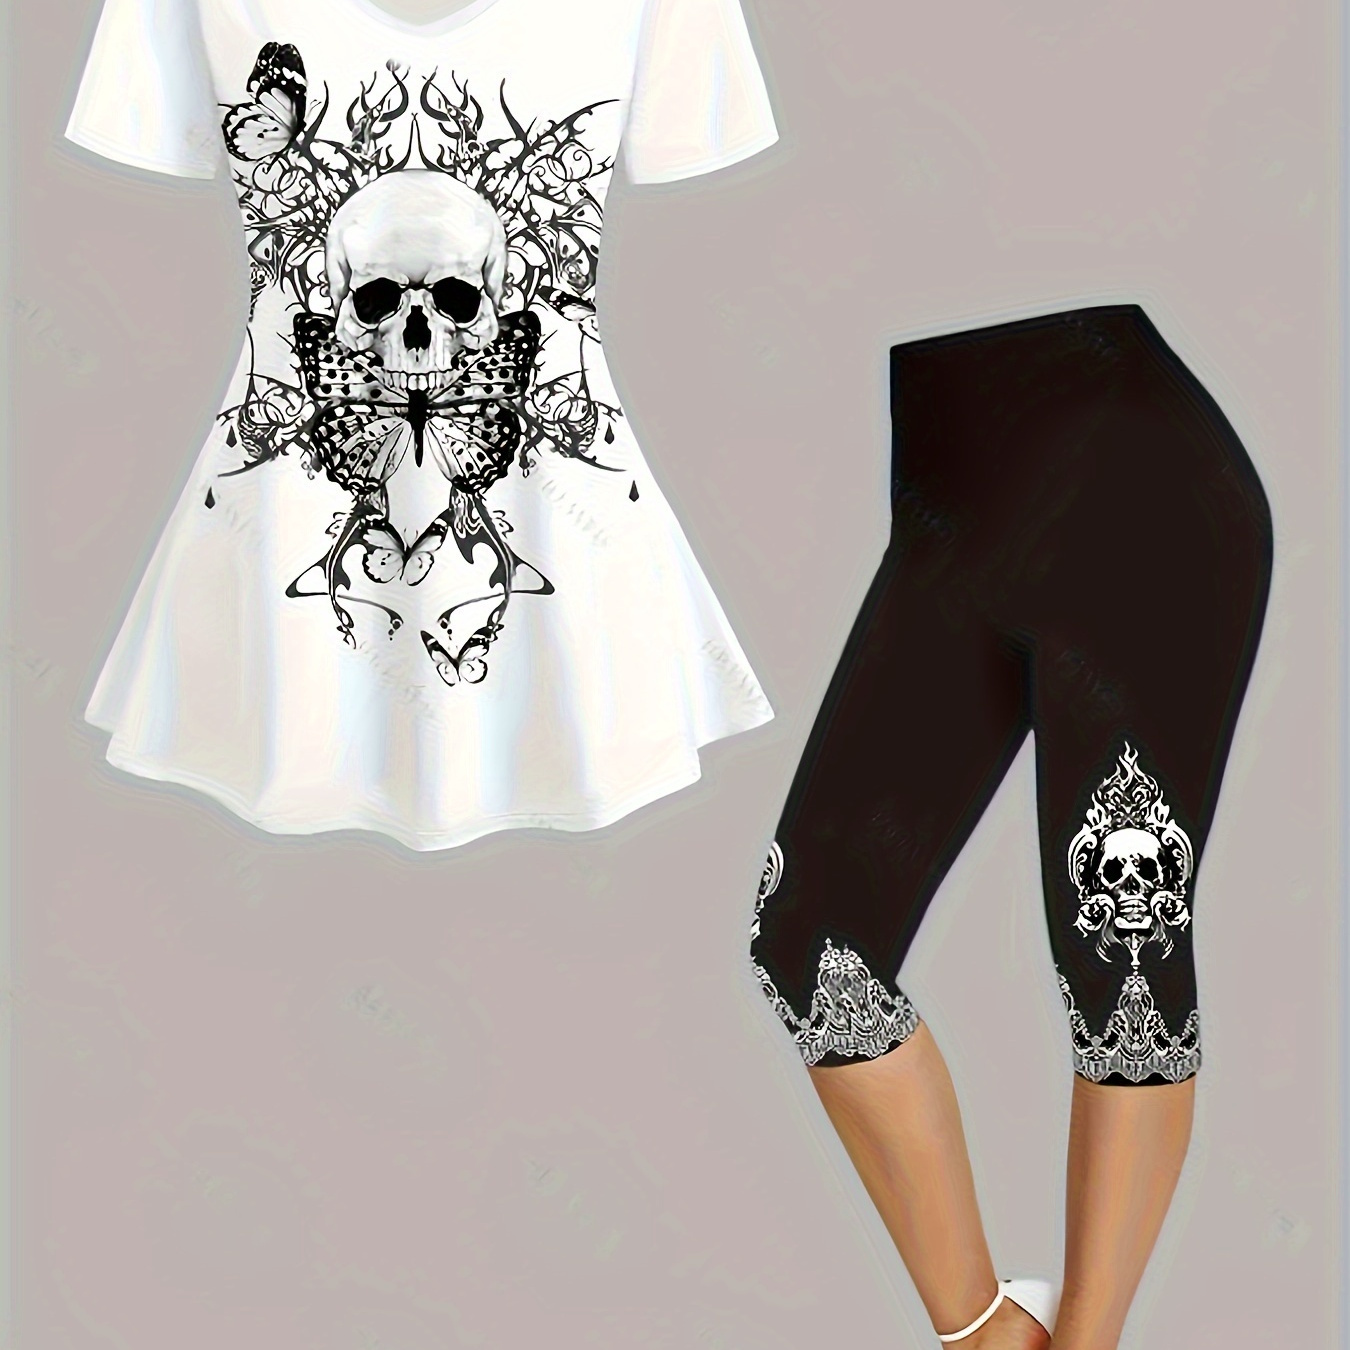 

Skull Print Casual 2 Piece Set, V Neck Short Sleeve Top & Skinny Capris Pants Outfits, Women's Clothing